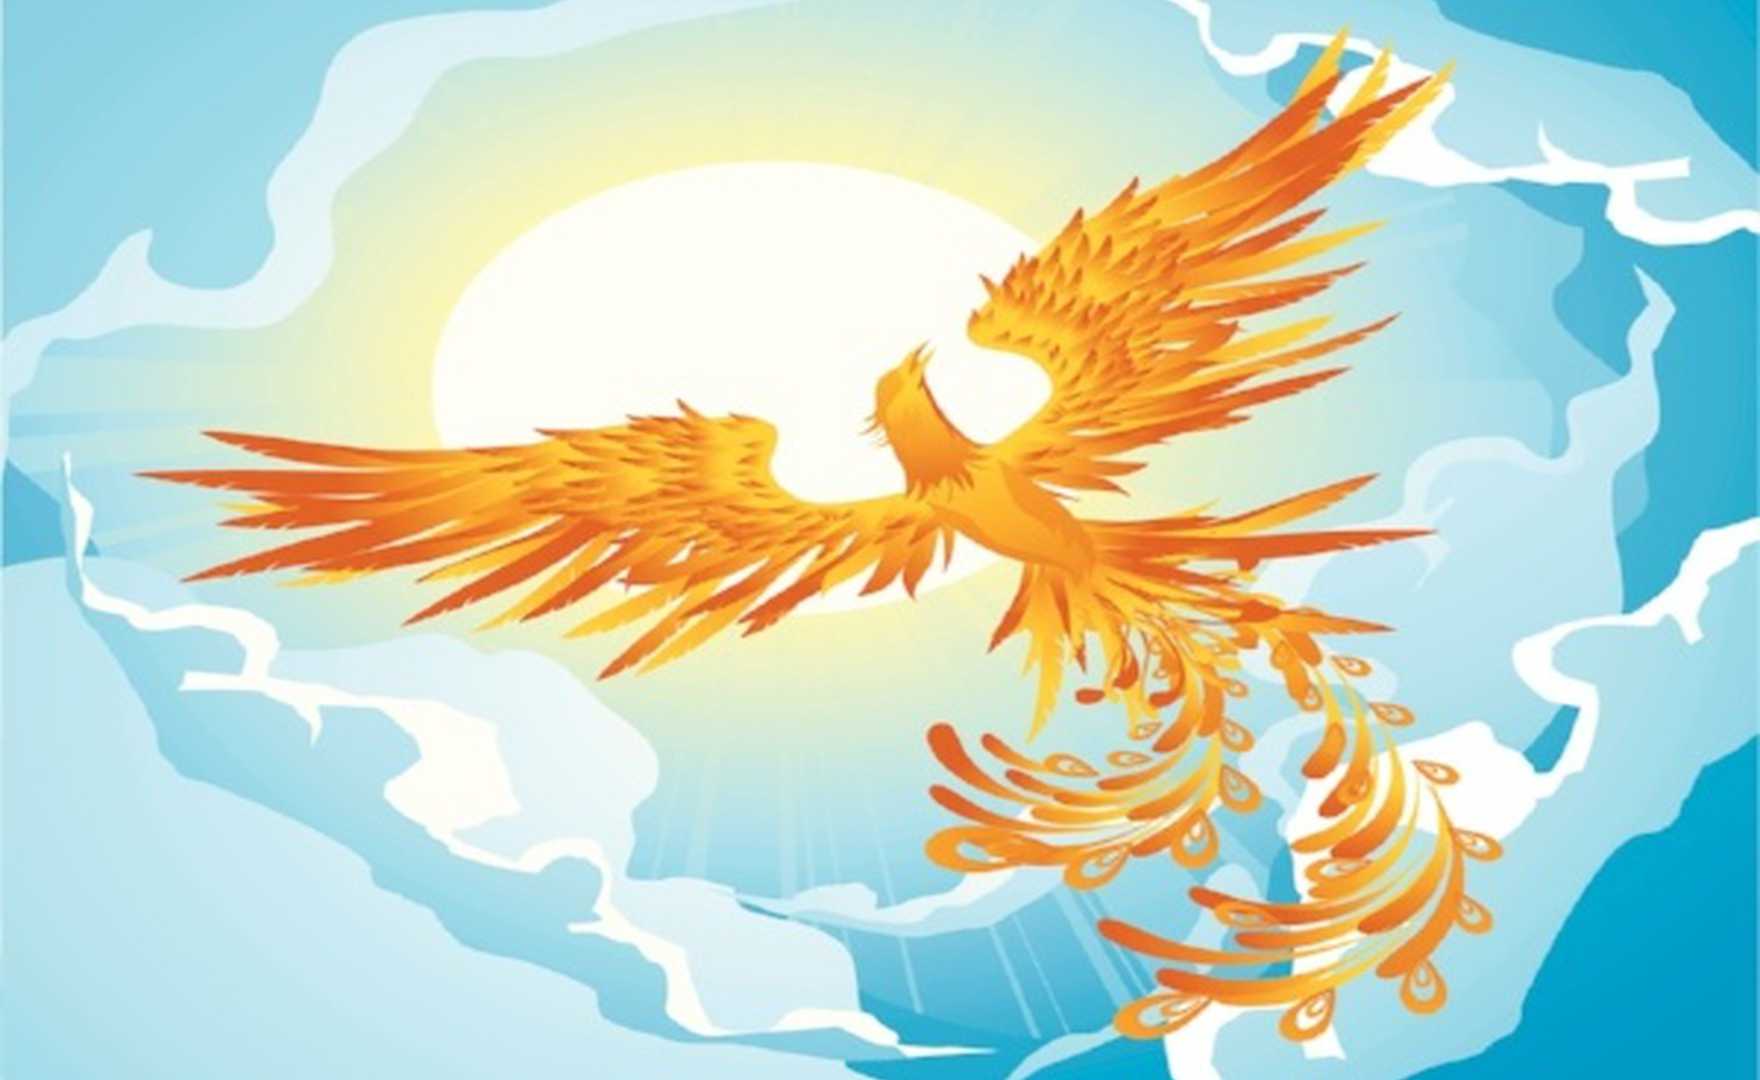 The Phoenix of Human Kindness and Compassion